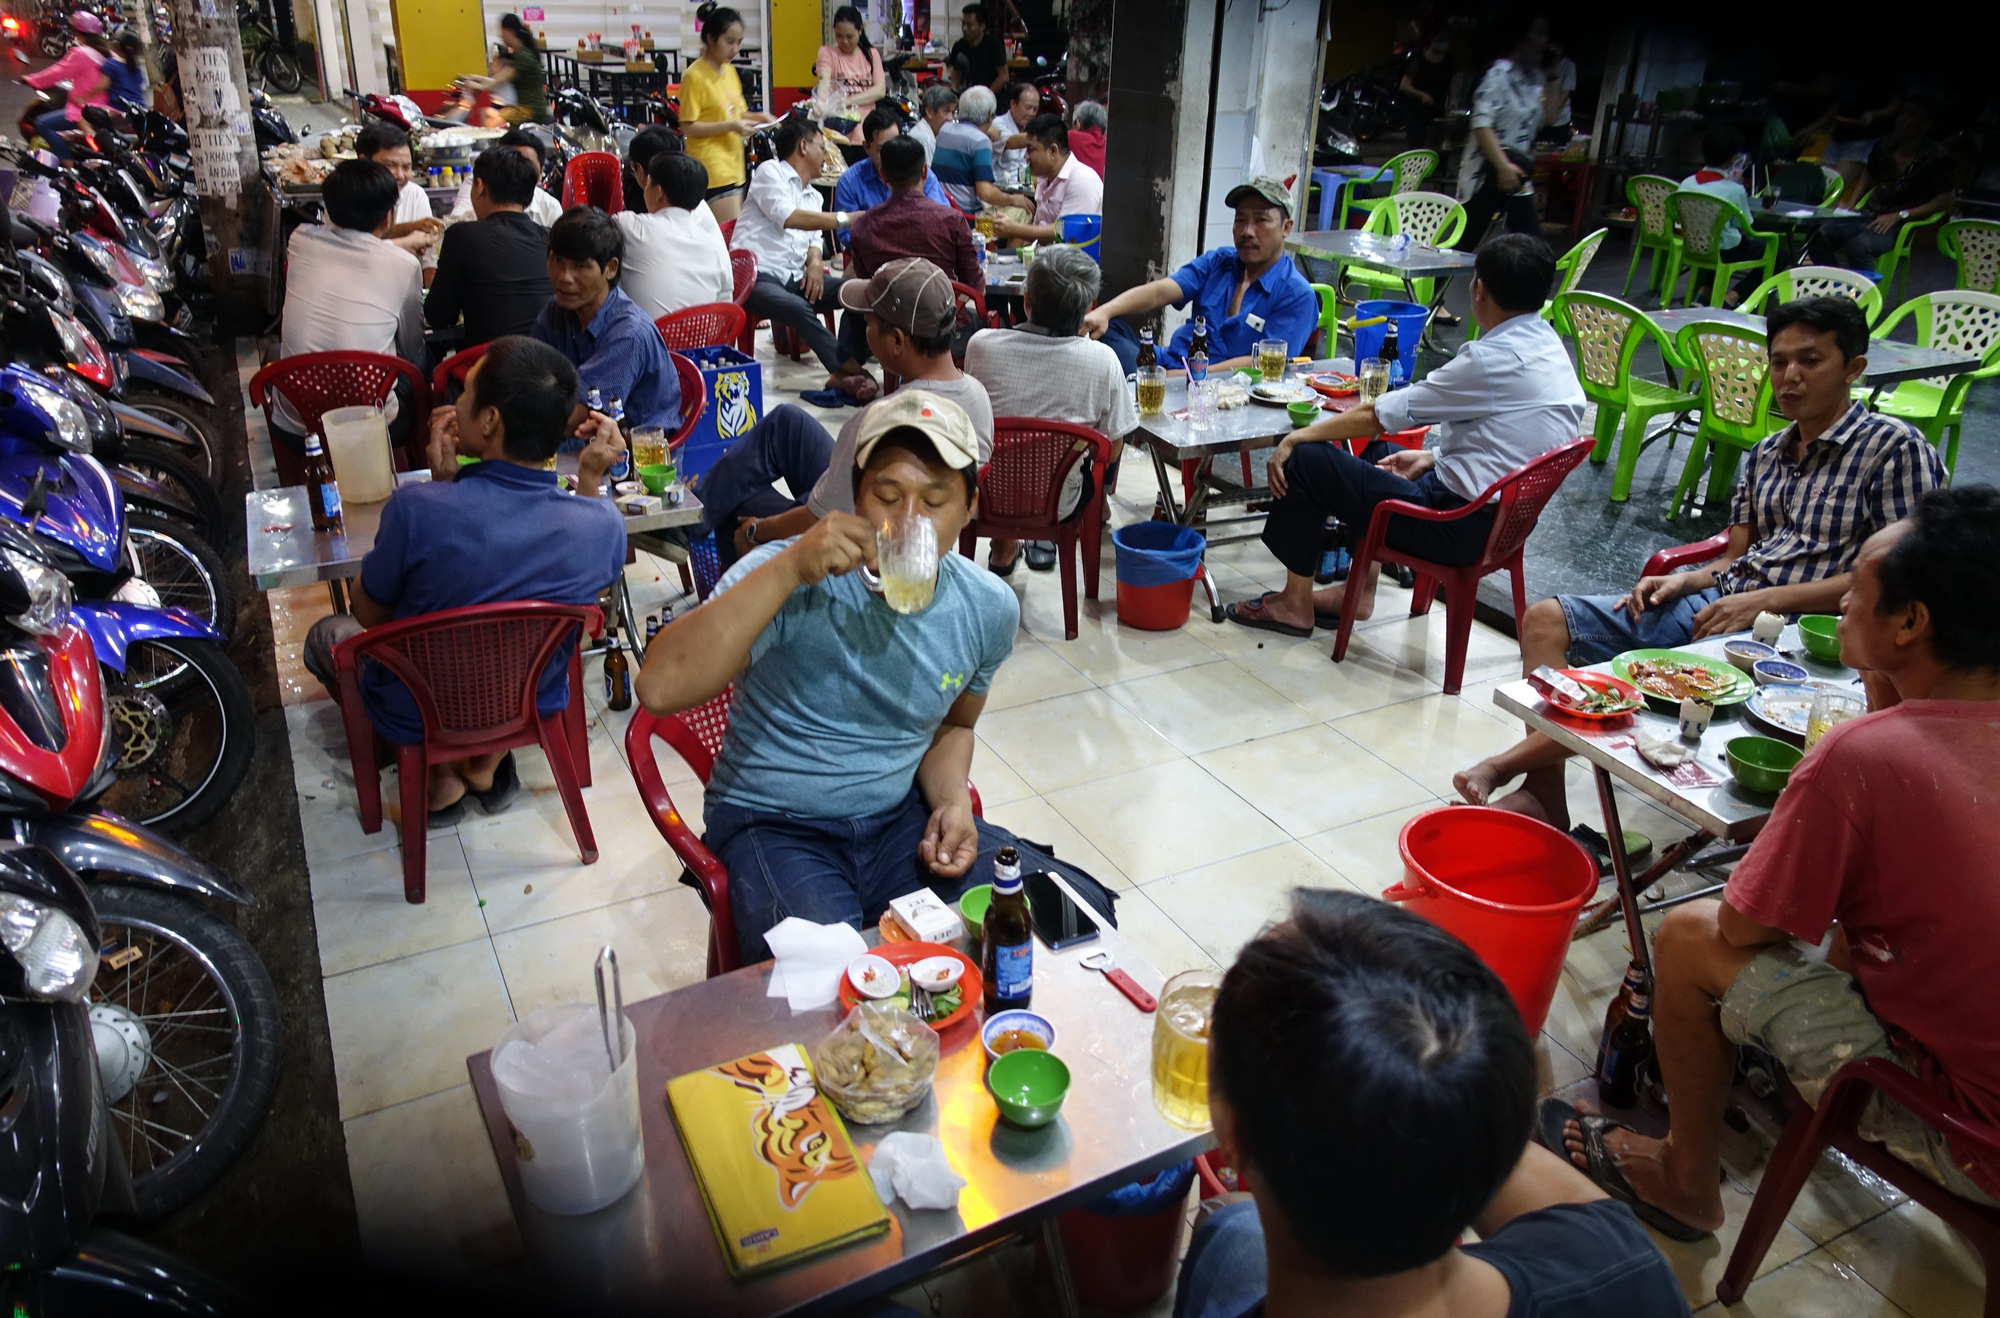 A beer shop in Tan Binh District, Ho Chi Minh City on December 19, 2019. Photo: Nguyen Cong Thanh / Tuoi Tre